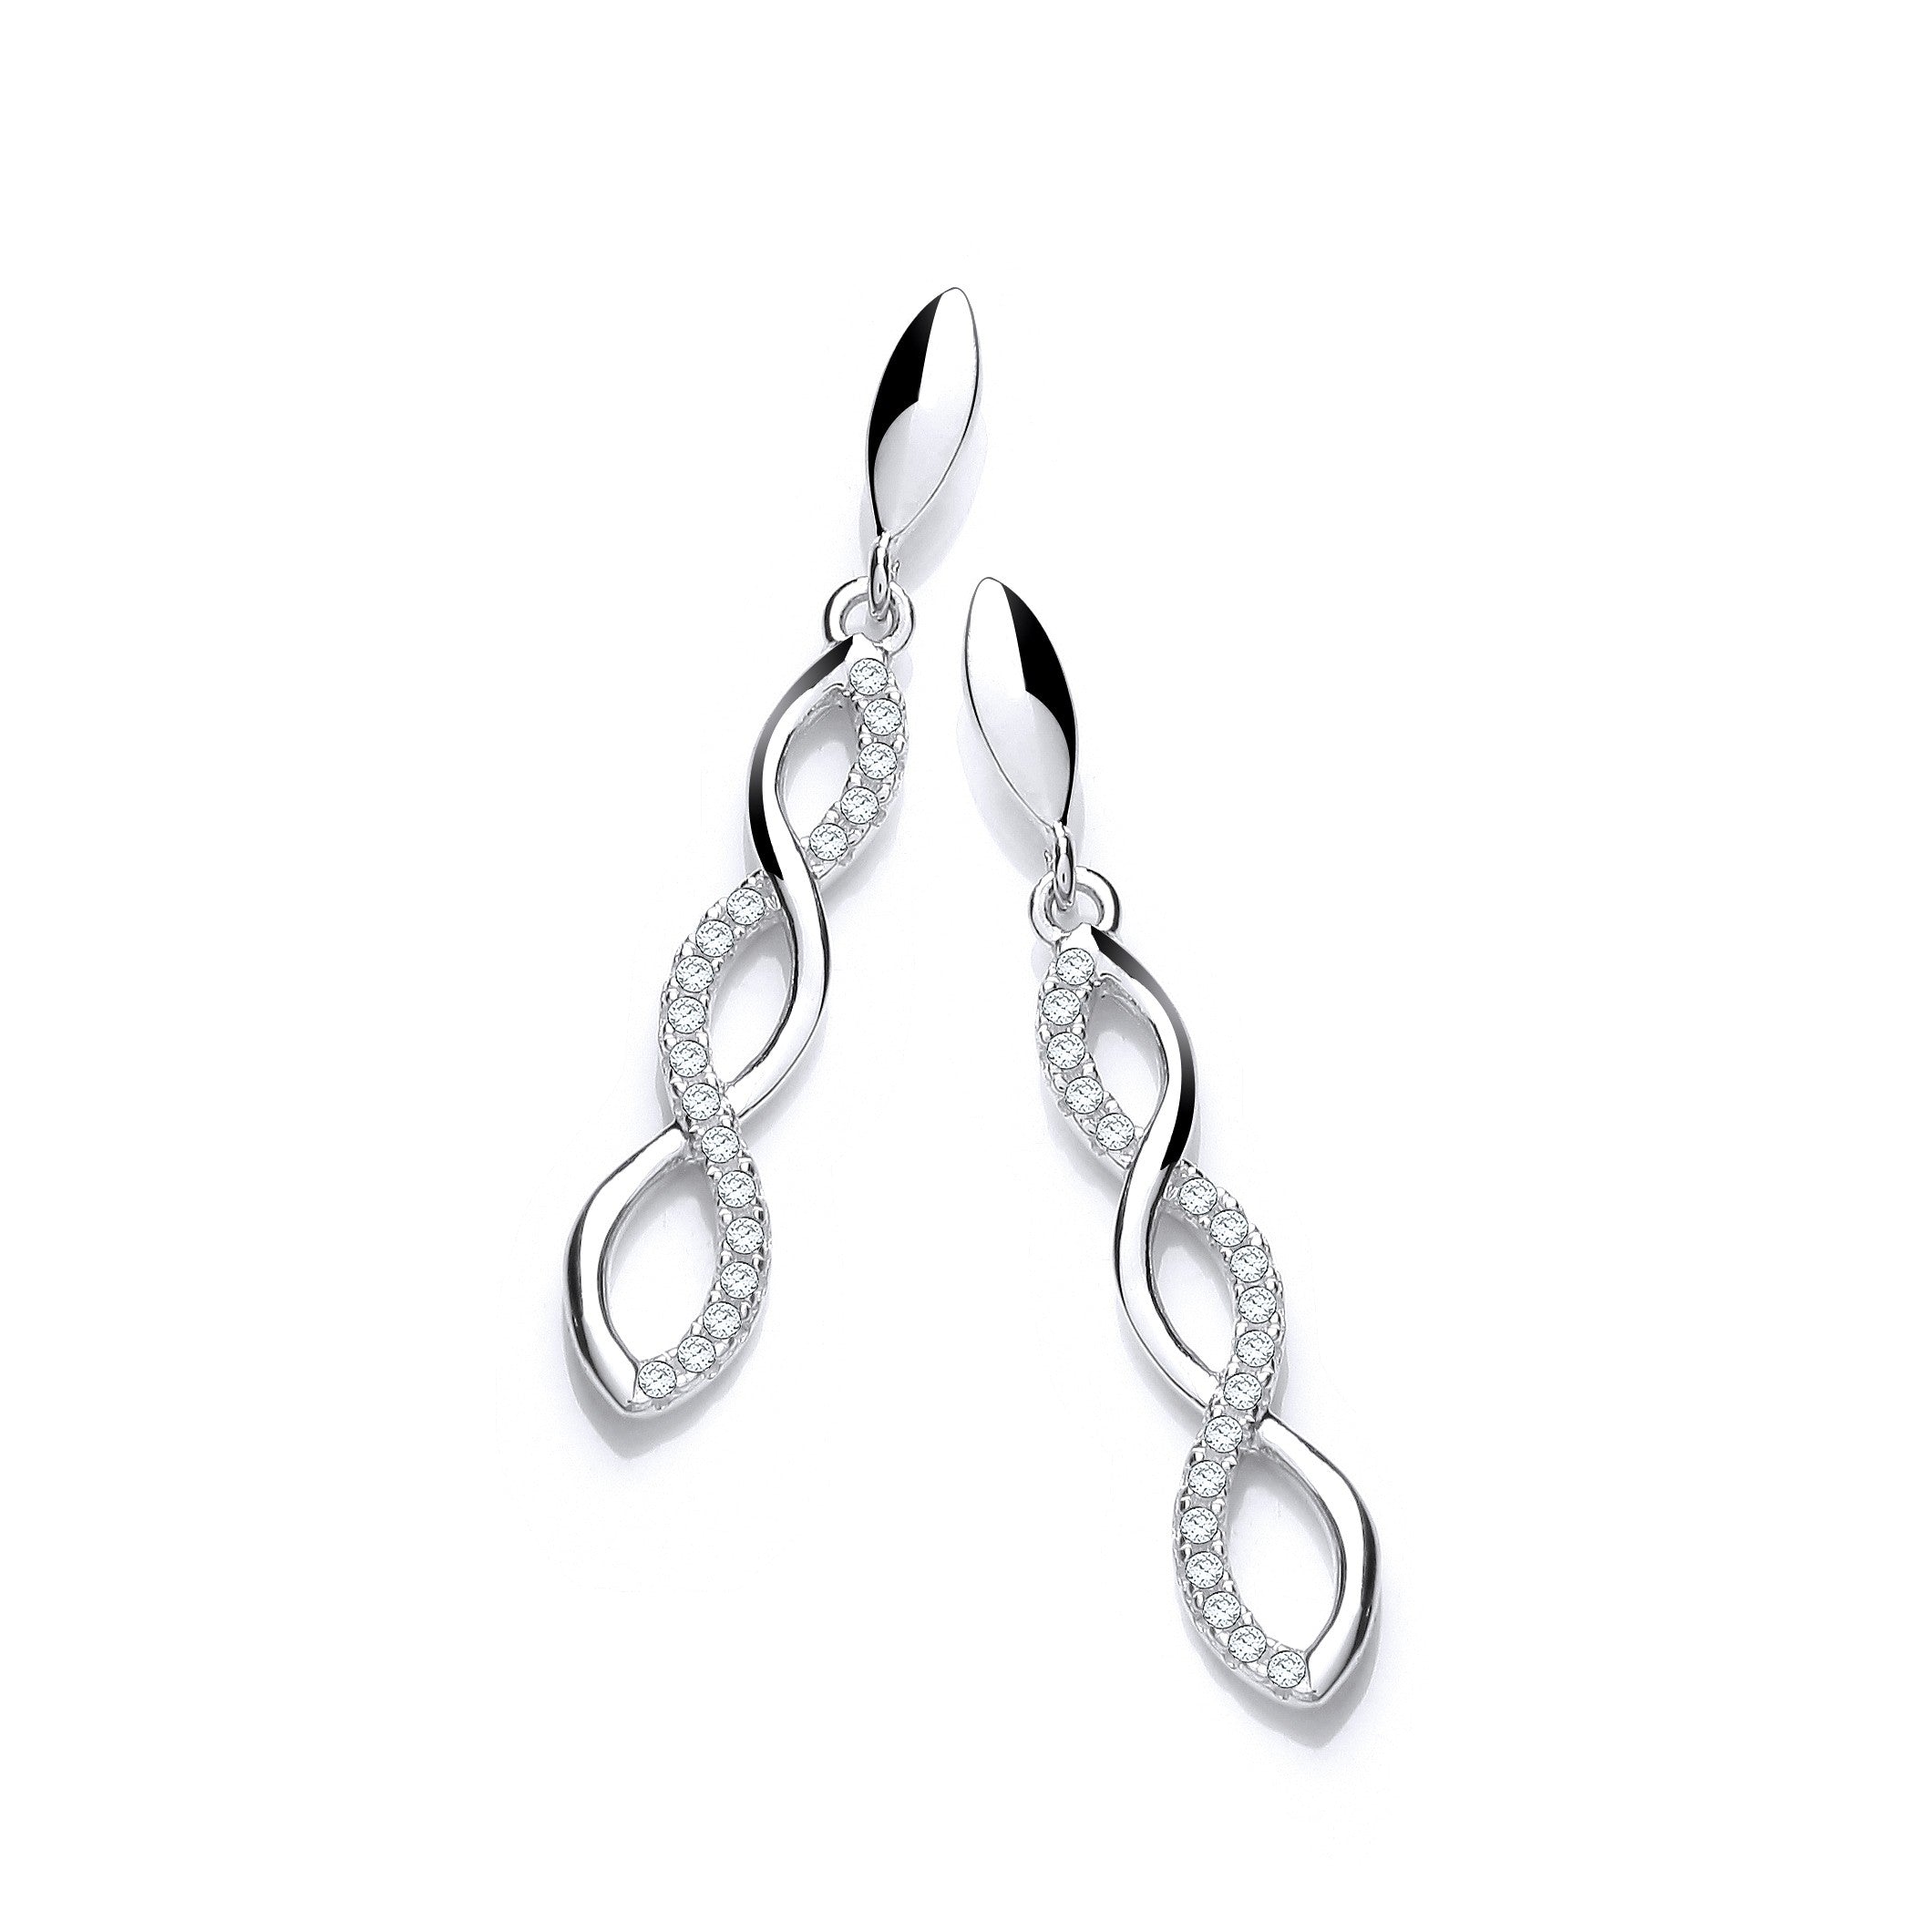 Micro Pave' Extended Figure of 8 Drop Cz Earrings